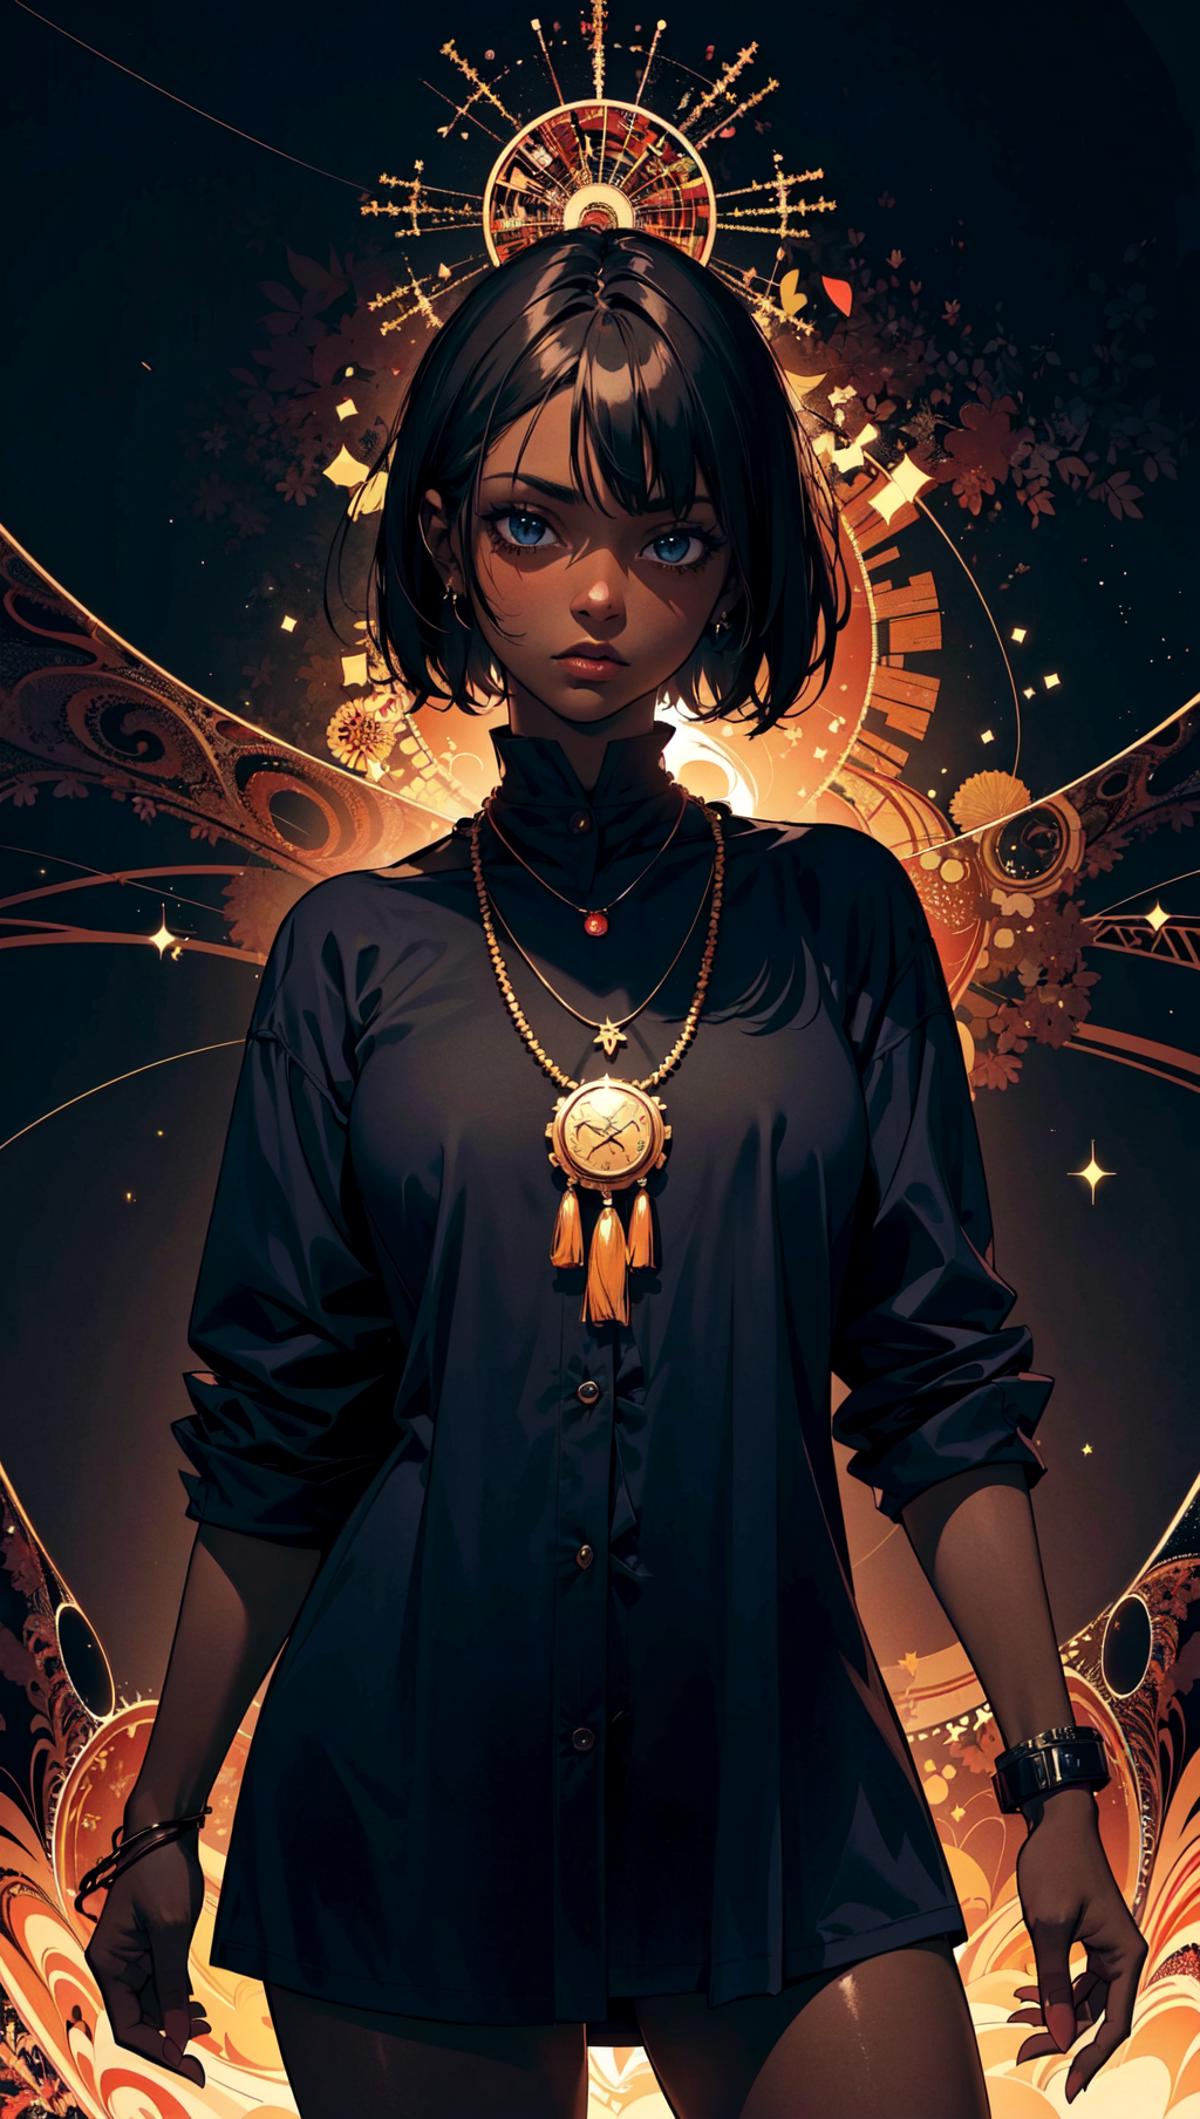 A woman wearing a black blouse and a clock necklace stands against a backdrop of stars and gears.